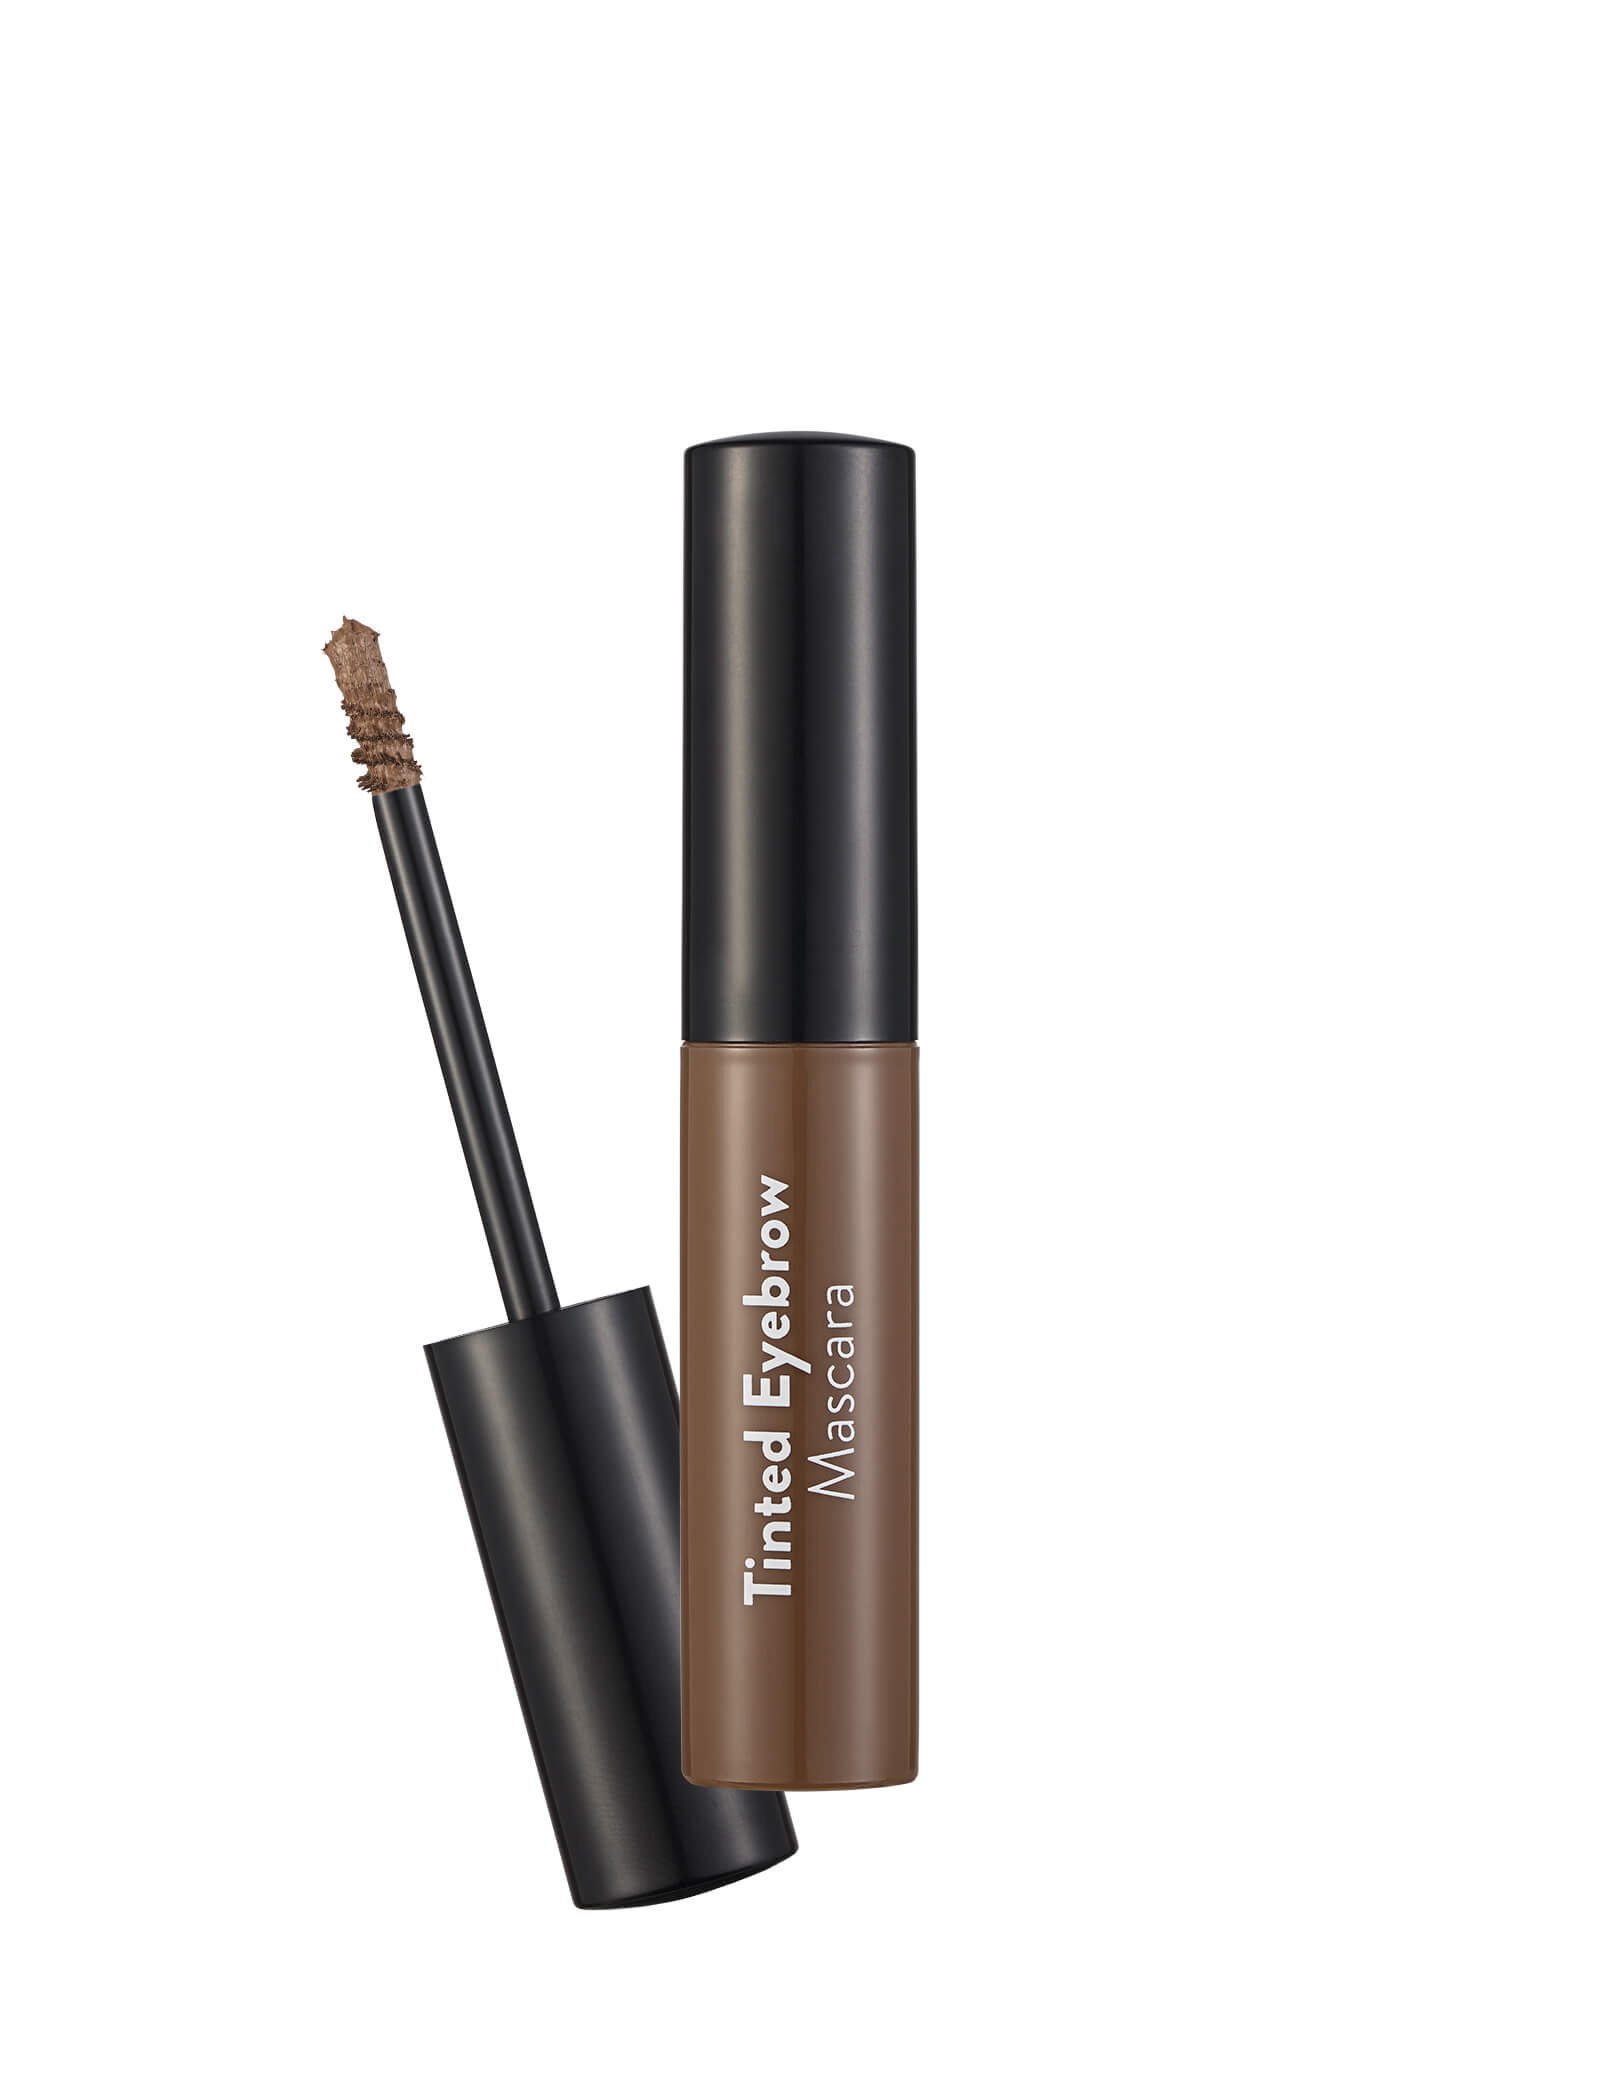 Colored eyebrow mascara 10 blonde from Flormar